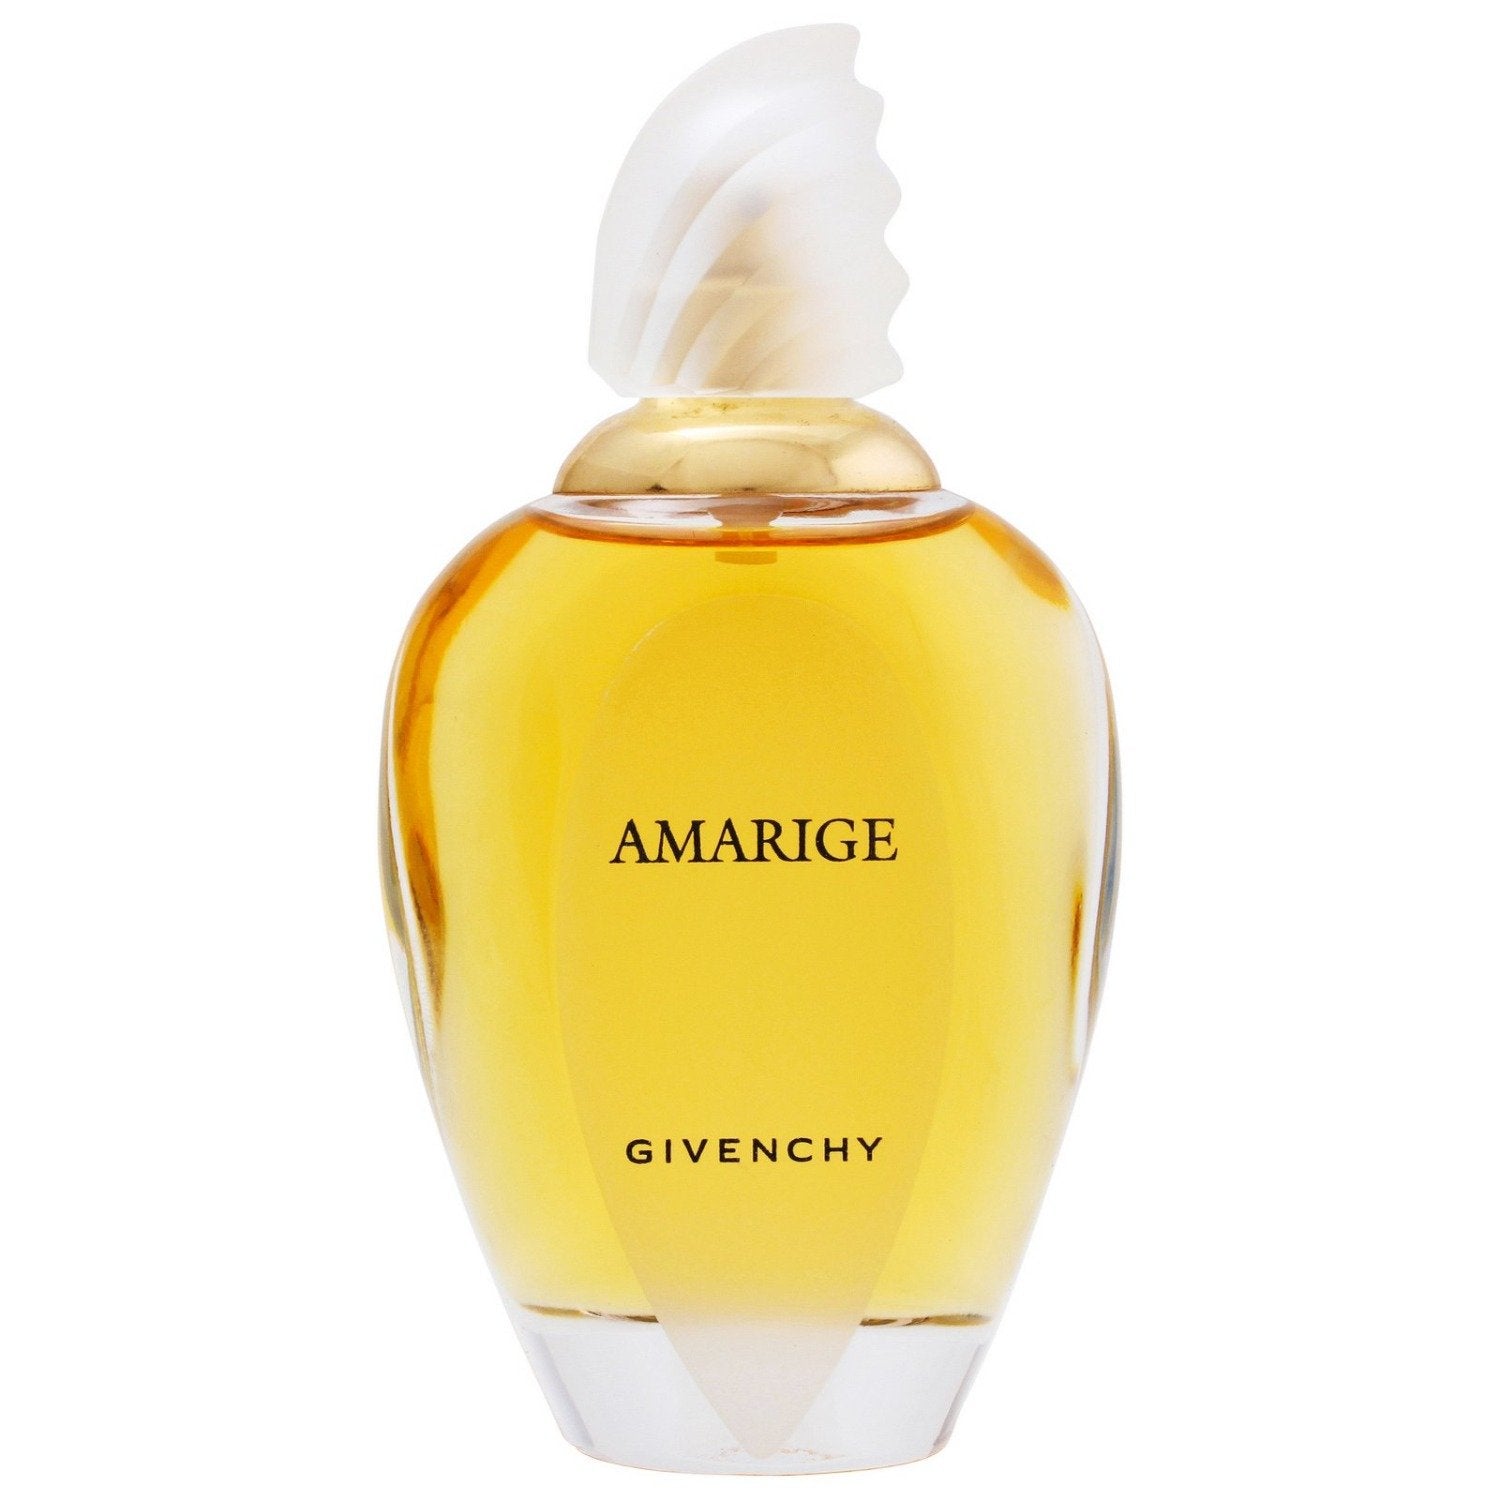 Amarige 100 ml Edt Mujer Givenchy - Productos de Lujo